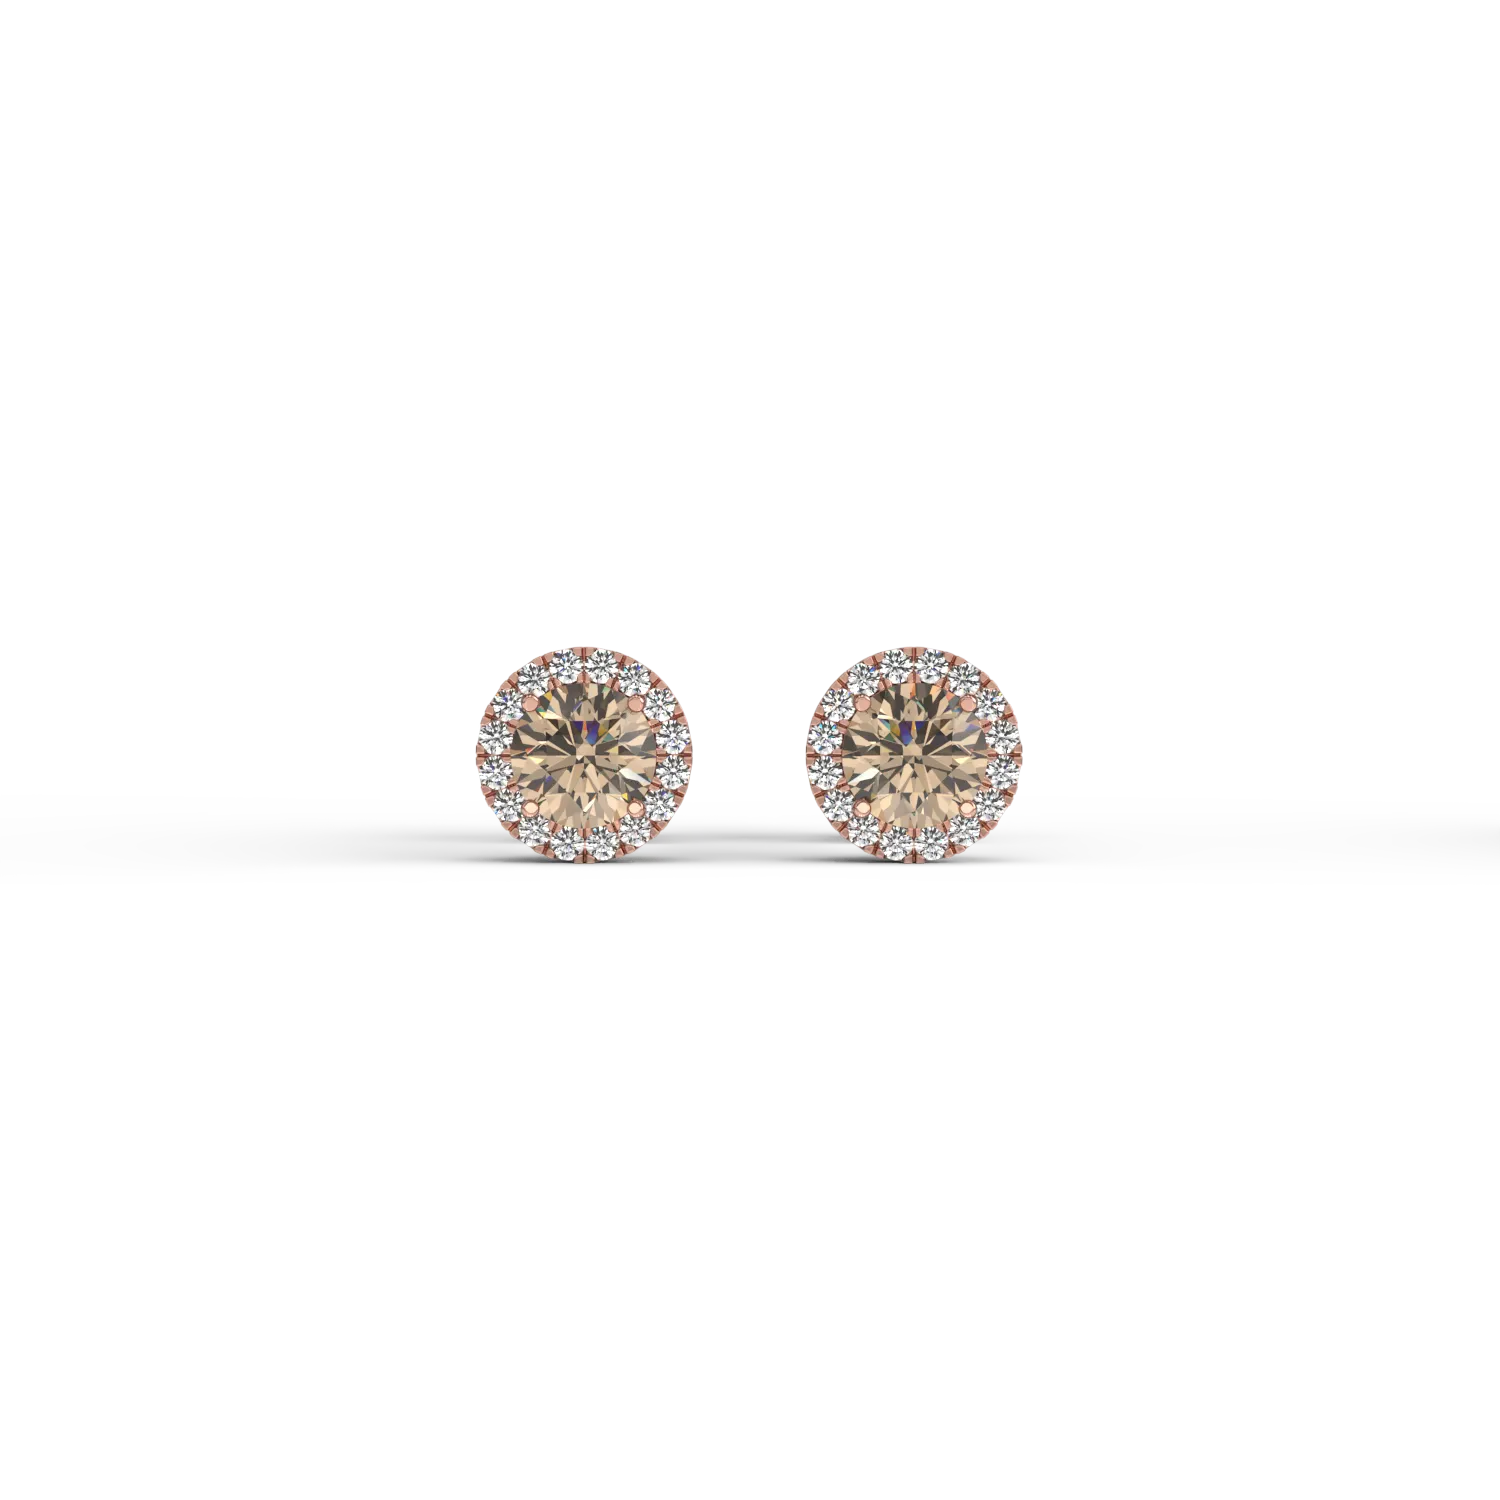 18K rose gold earrings with 1.03ct brown diamonds and 0.16ct clear diamonds